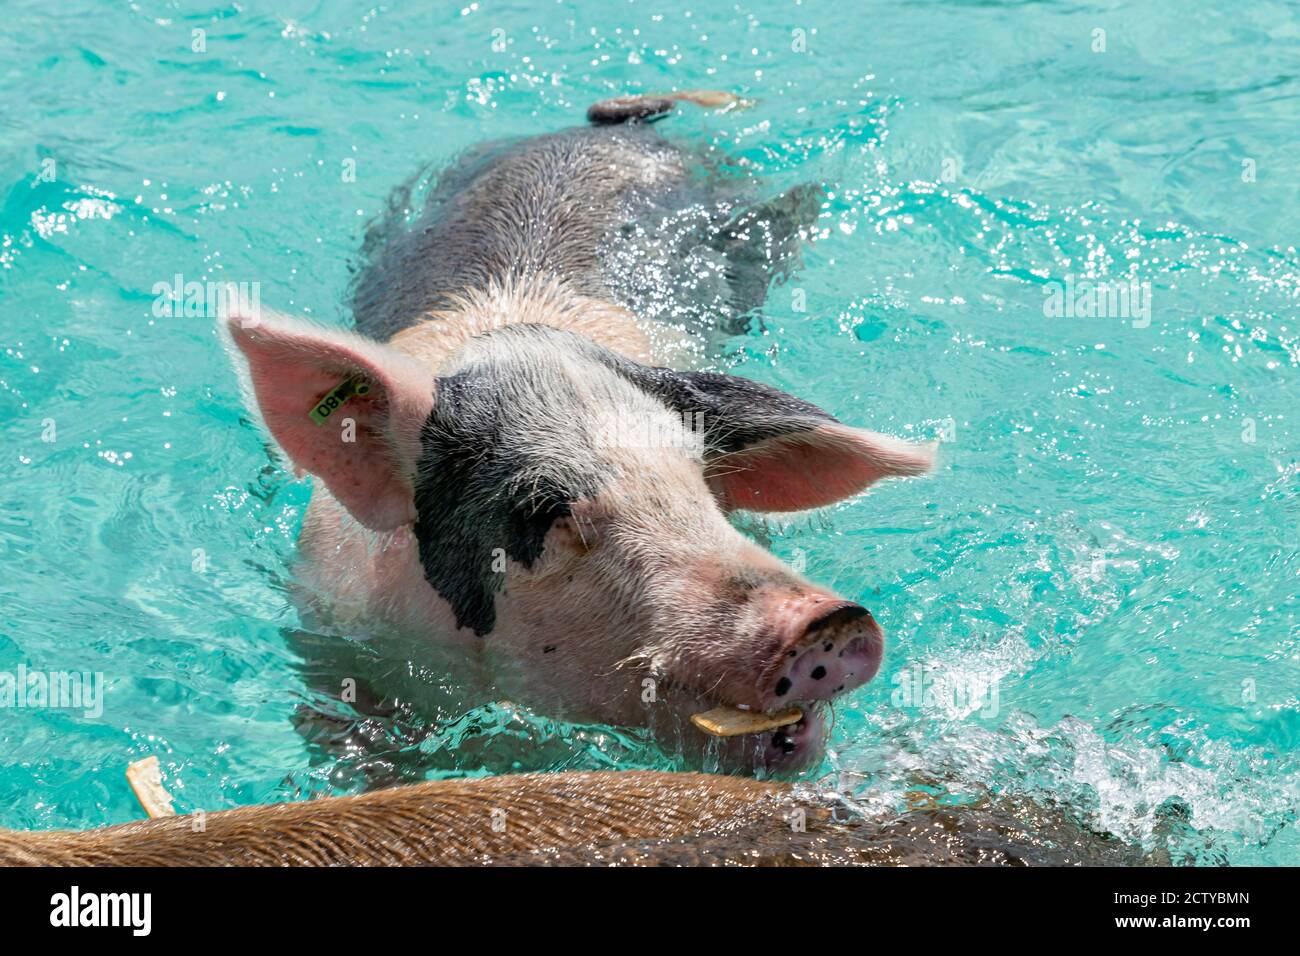 The famous swimming pigs (feral pigs) of Bahamas living in an uninhabited island located in Exuma called Big Major Cay (better known as Pig island). Stock Photo